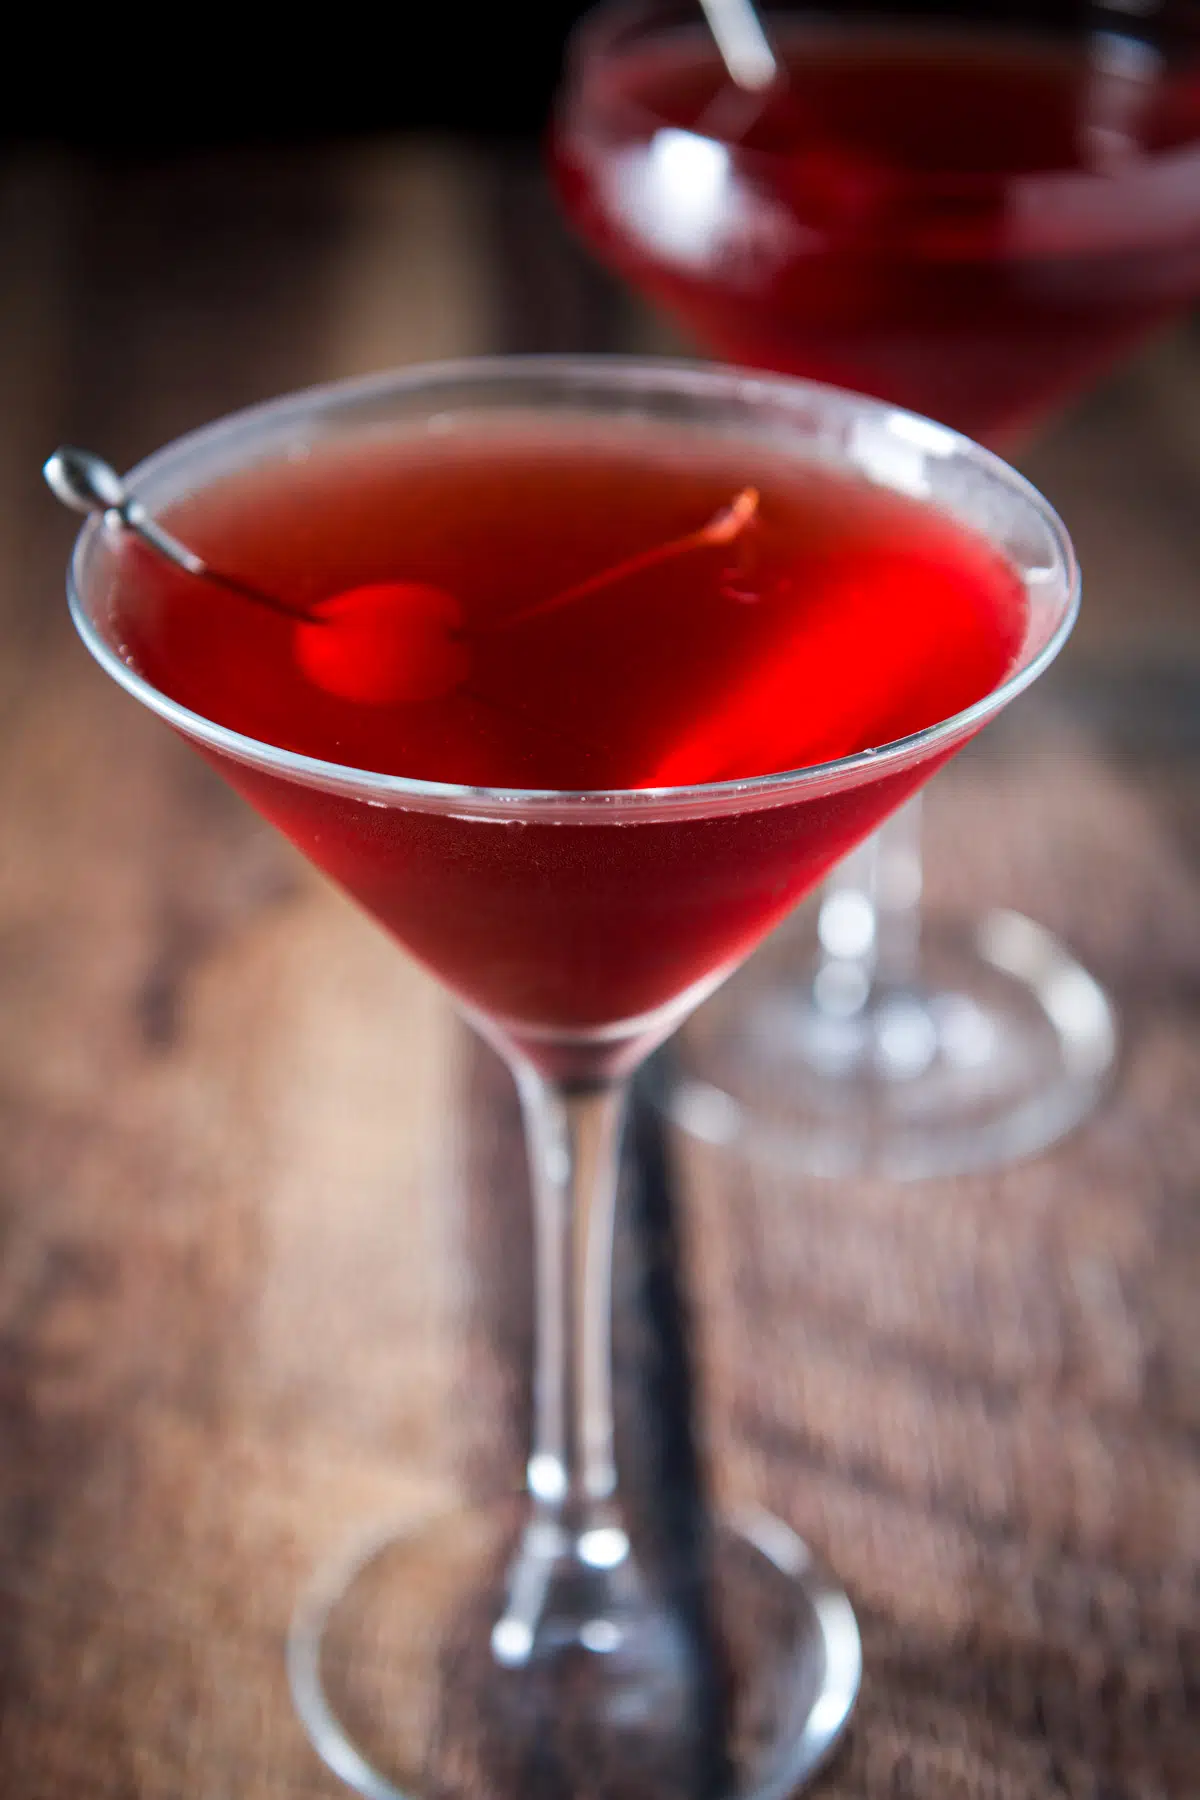 Martini glass with a cherry and pick in it filled with the red drink